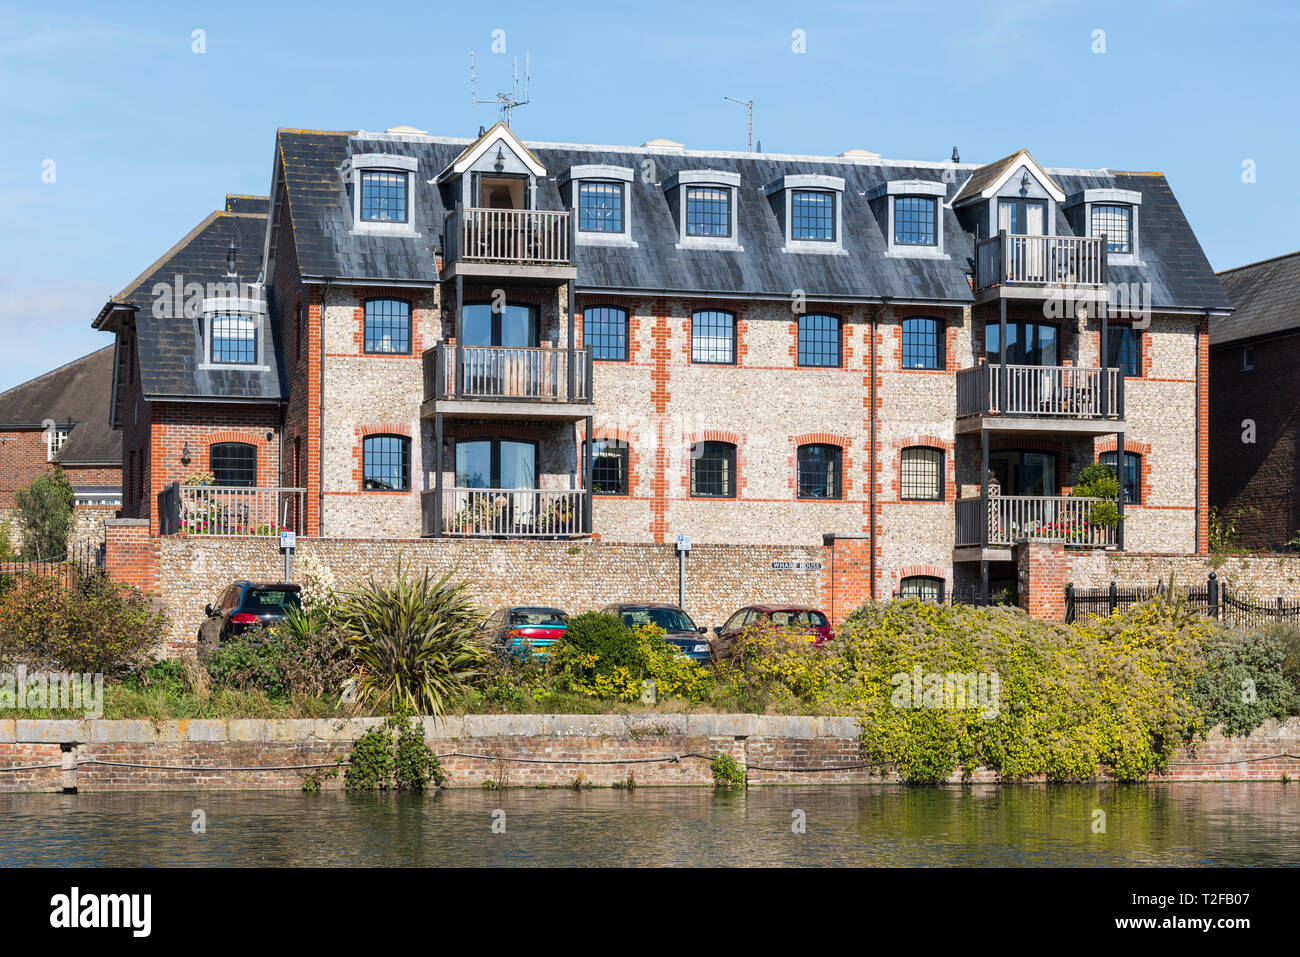 Wharf House luxury penthouse apartment block by the Chichester Canal in Chichester, West Sussex, England, UK. Stock Photo